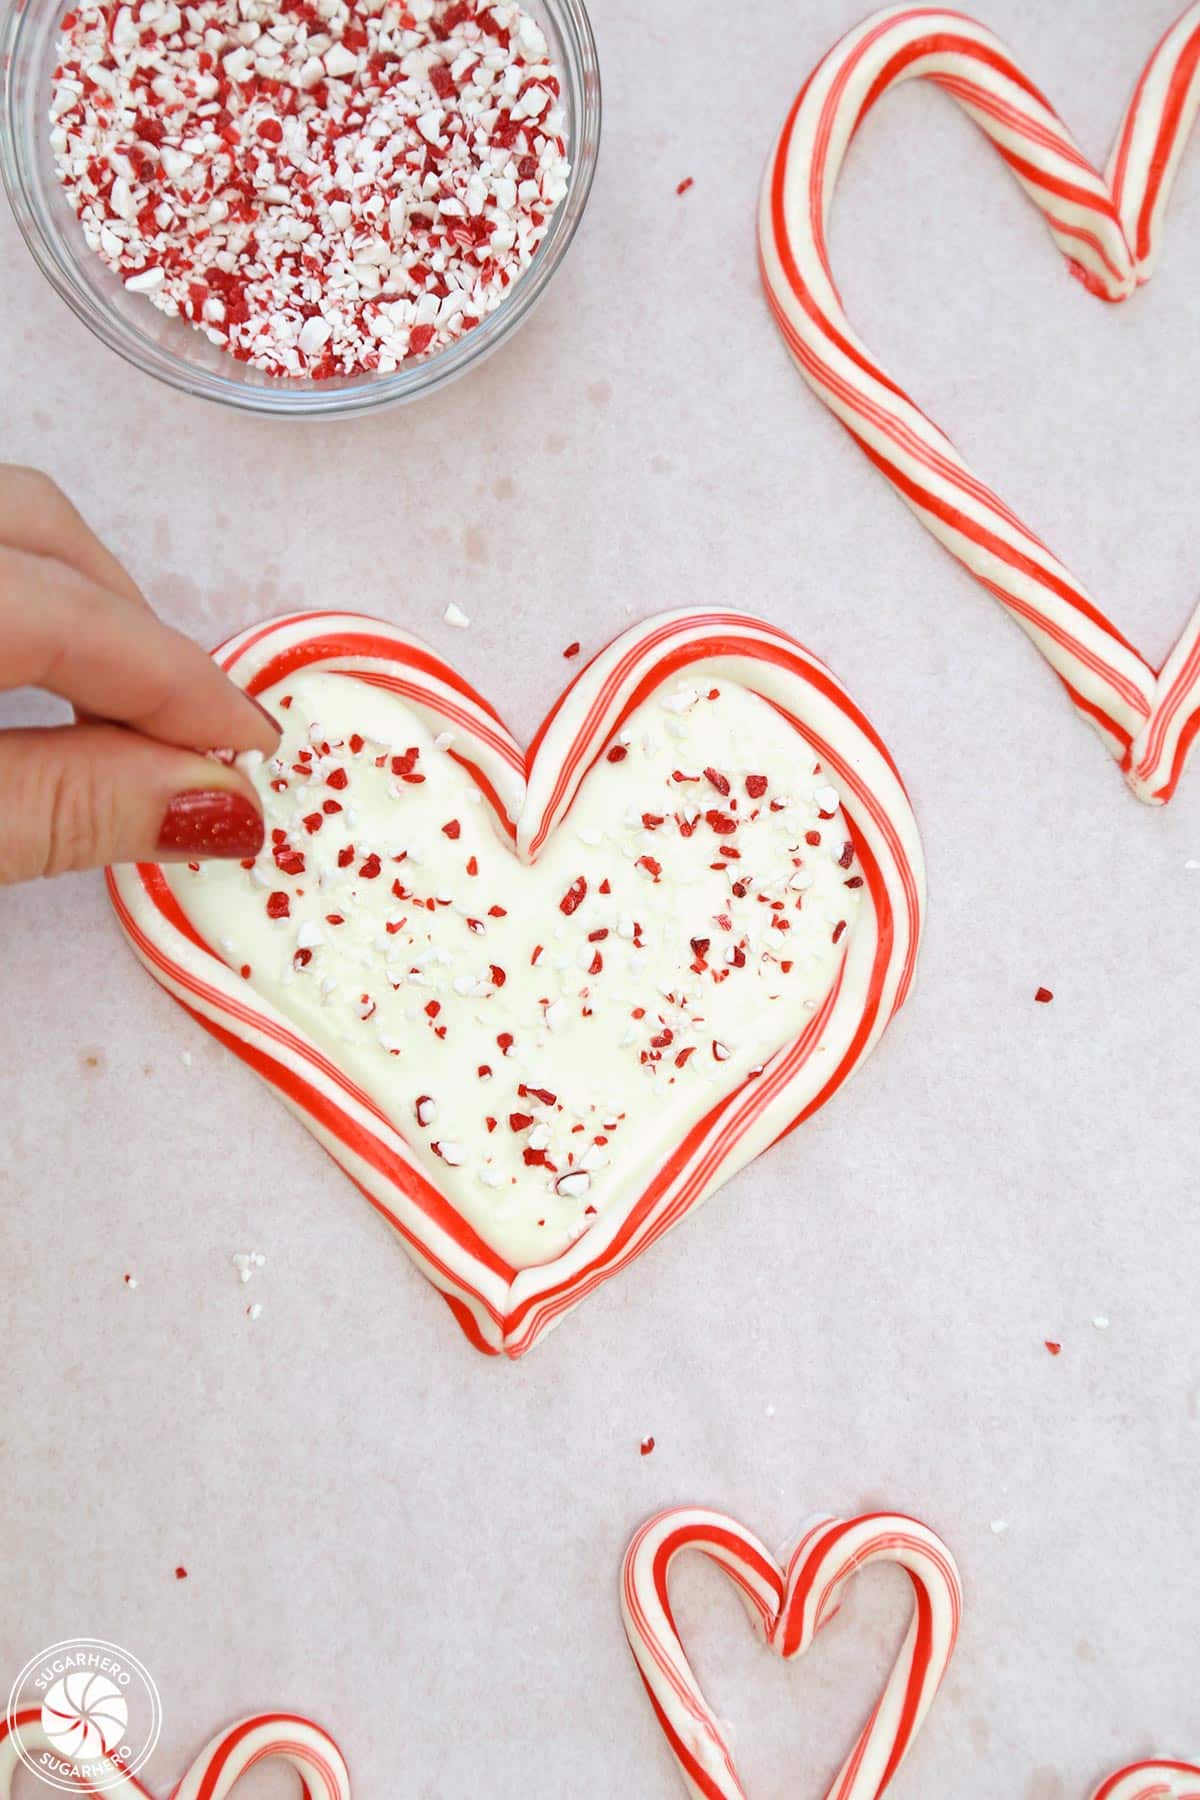 Hand sprinkling crushed candy cane pieces on white chocolate inside a candy cane heart.